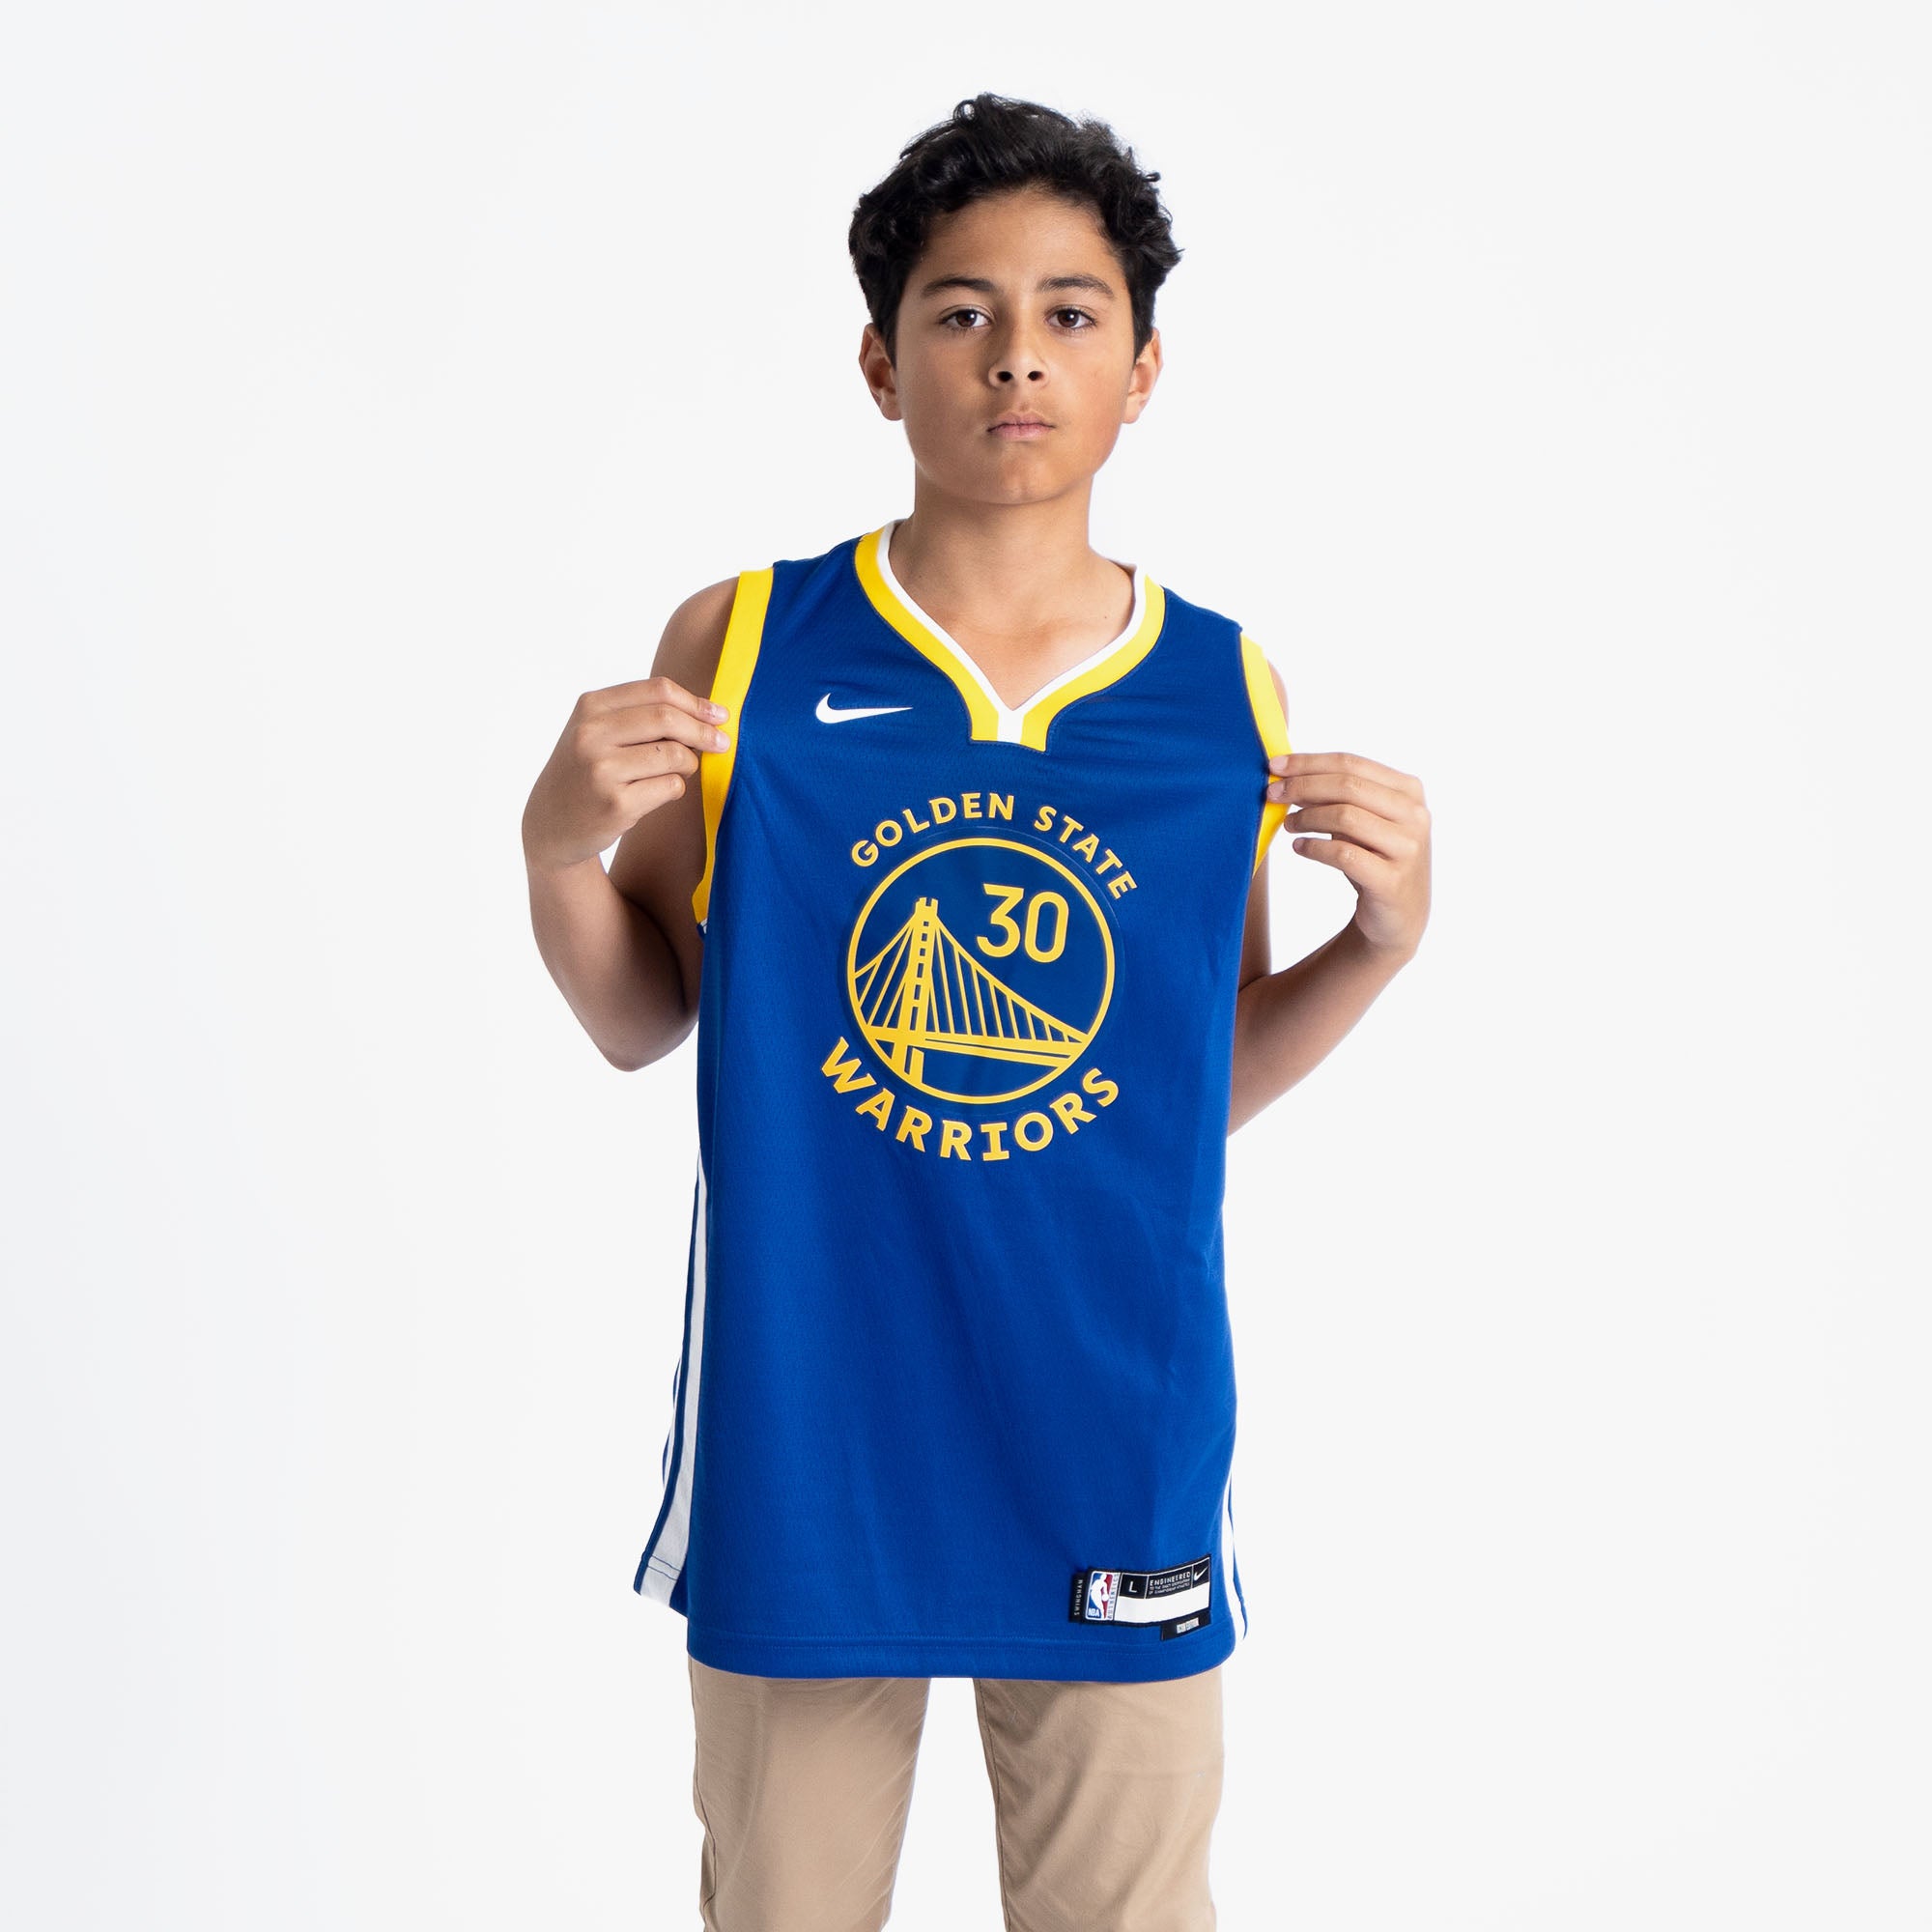 nba curry jersey youth